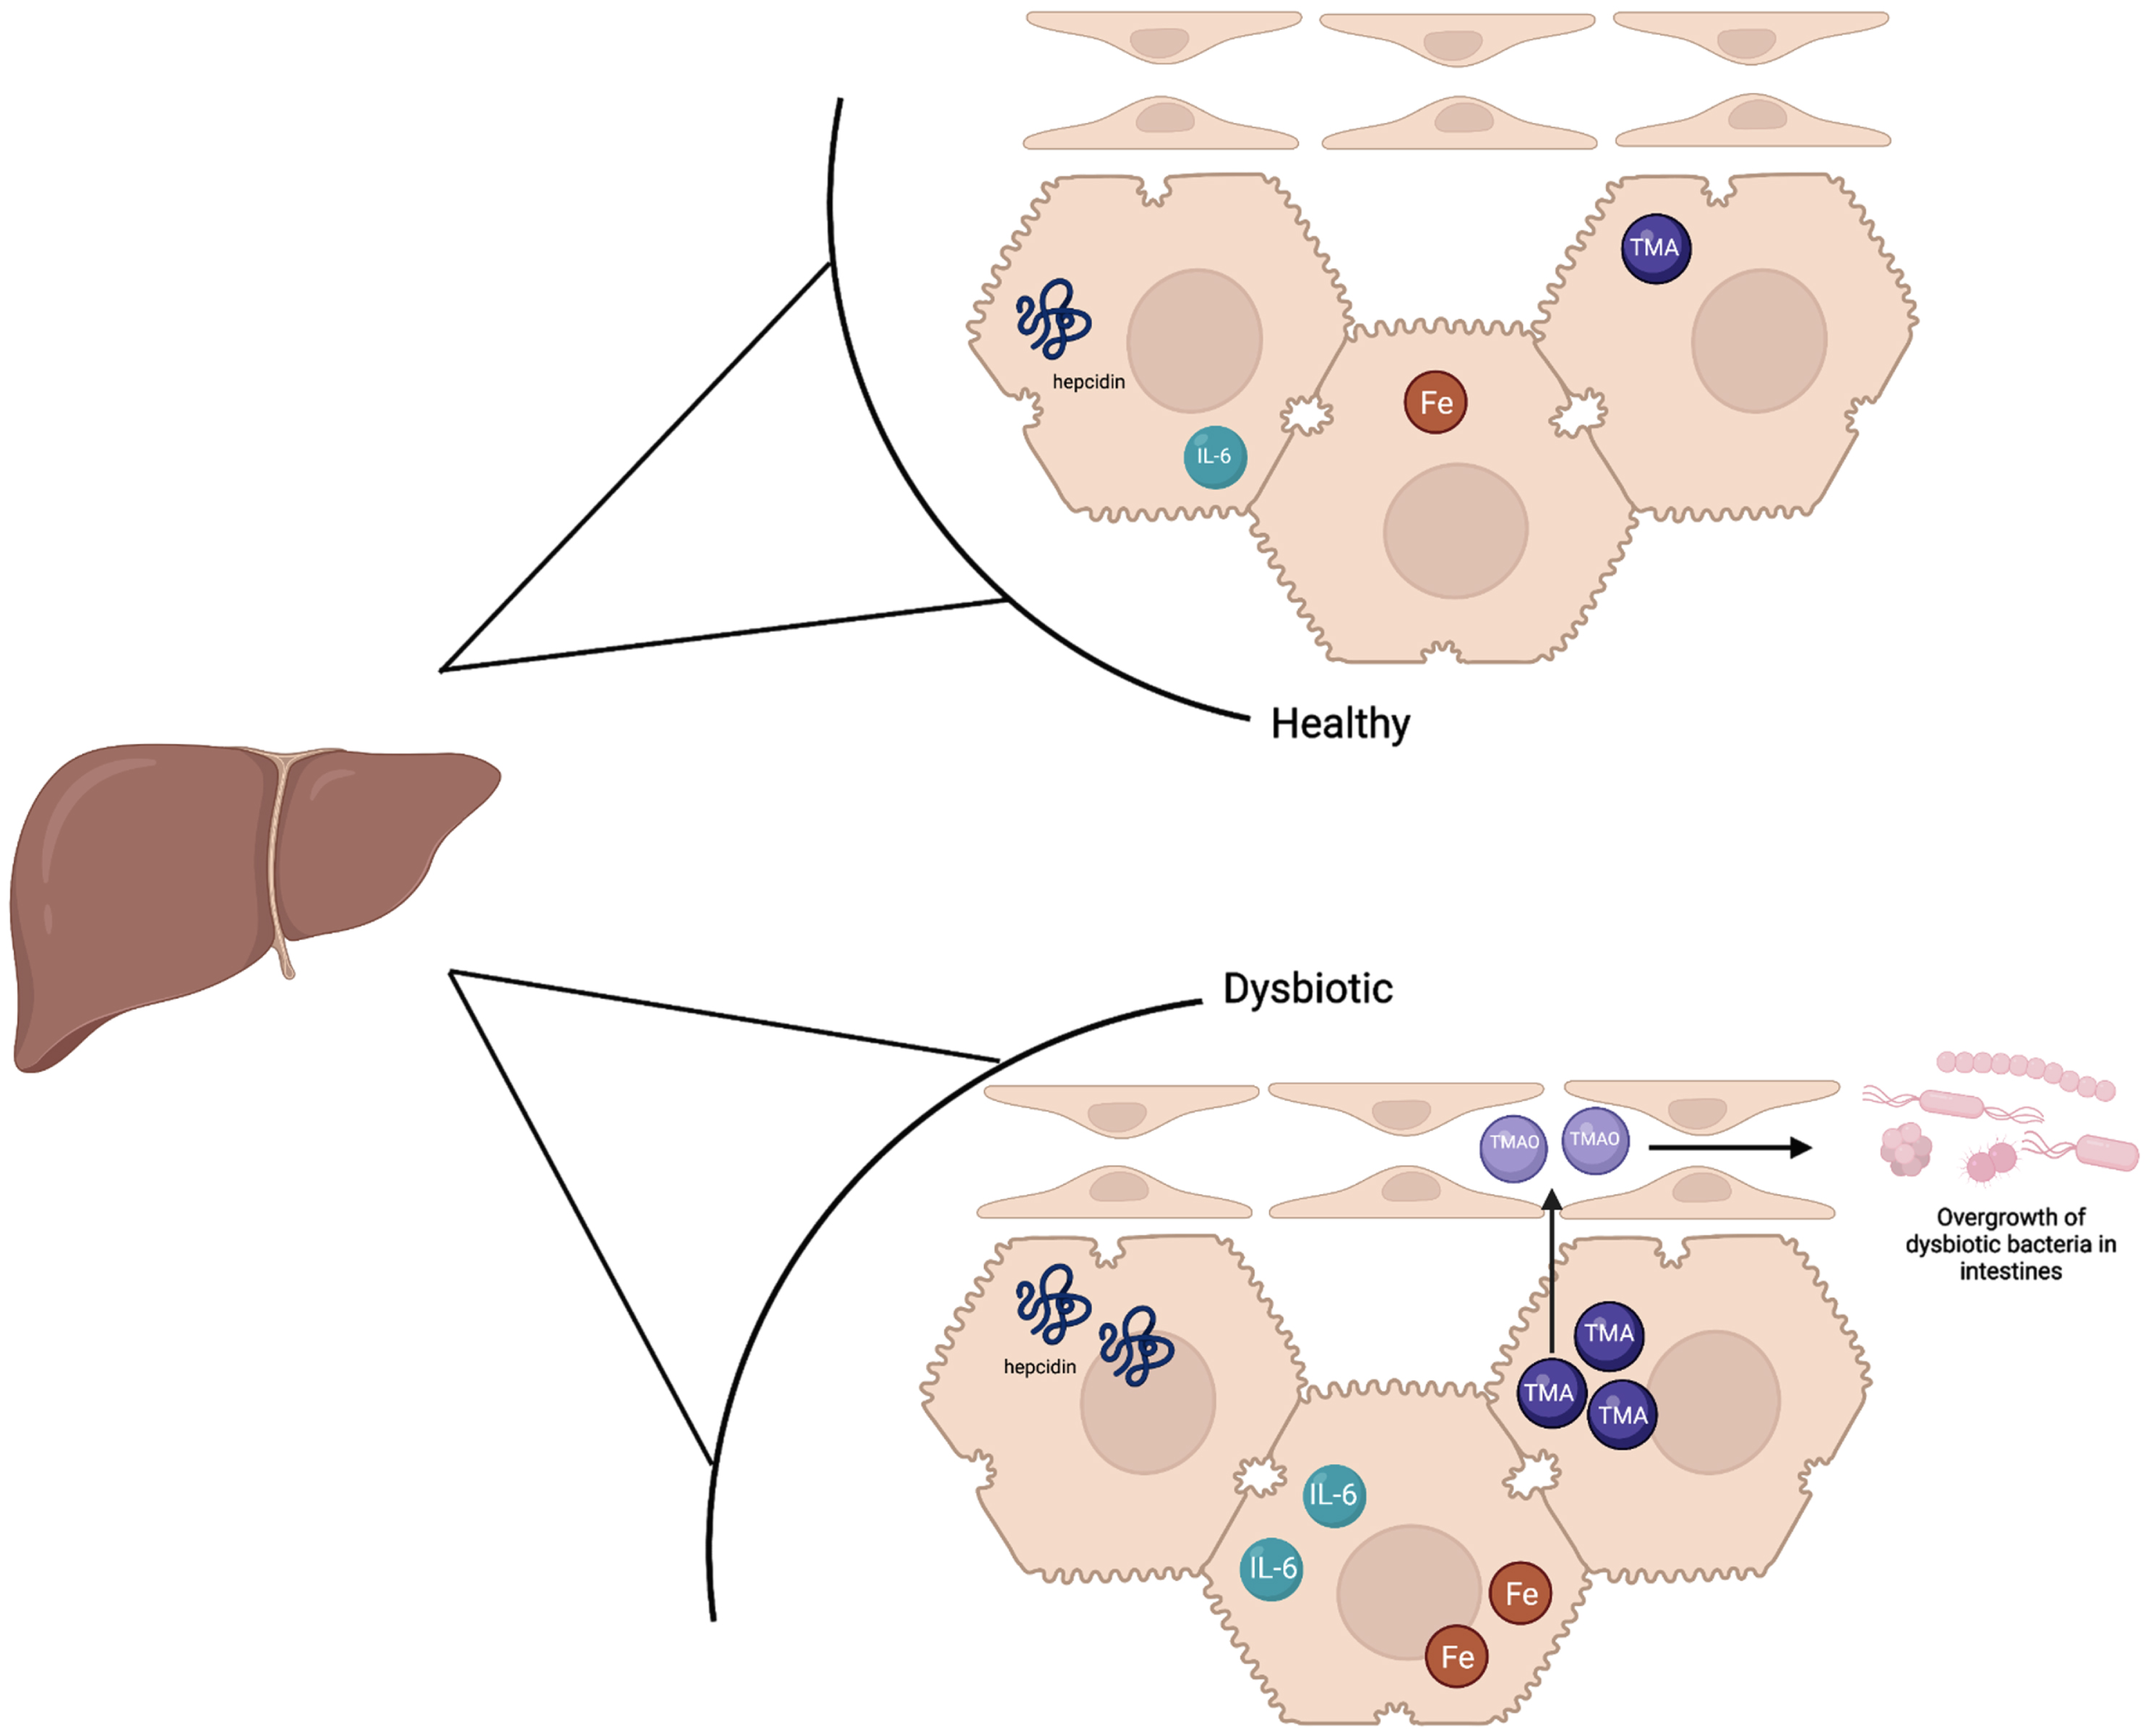 The liver in a healthy state contains baseline hepcidin, IL-6, and TMA levels which supports a balance of healthy and dysbiotic bacteria. Iron levels are slightly higher in the healthy state than a dysbiotic state as hepcidin is upregulated in a dysbiotic state. In the dysbiotic state, IL-6 is also upregulated in the liver, and higher levels of TMA are sent to the liver to be oxidized to TMAO. TMAO is sent to the small intestines which ultimately causes inflammation and the overgrowth of dysbiotic bacteria.